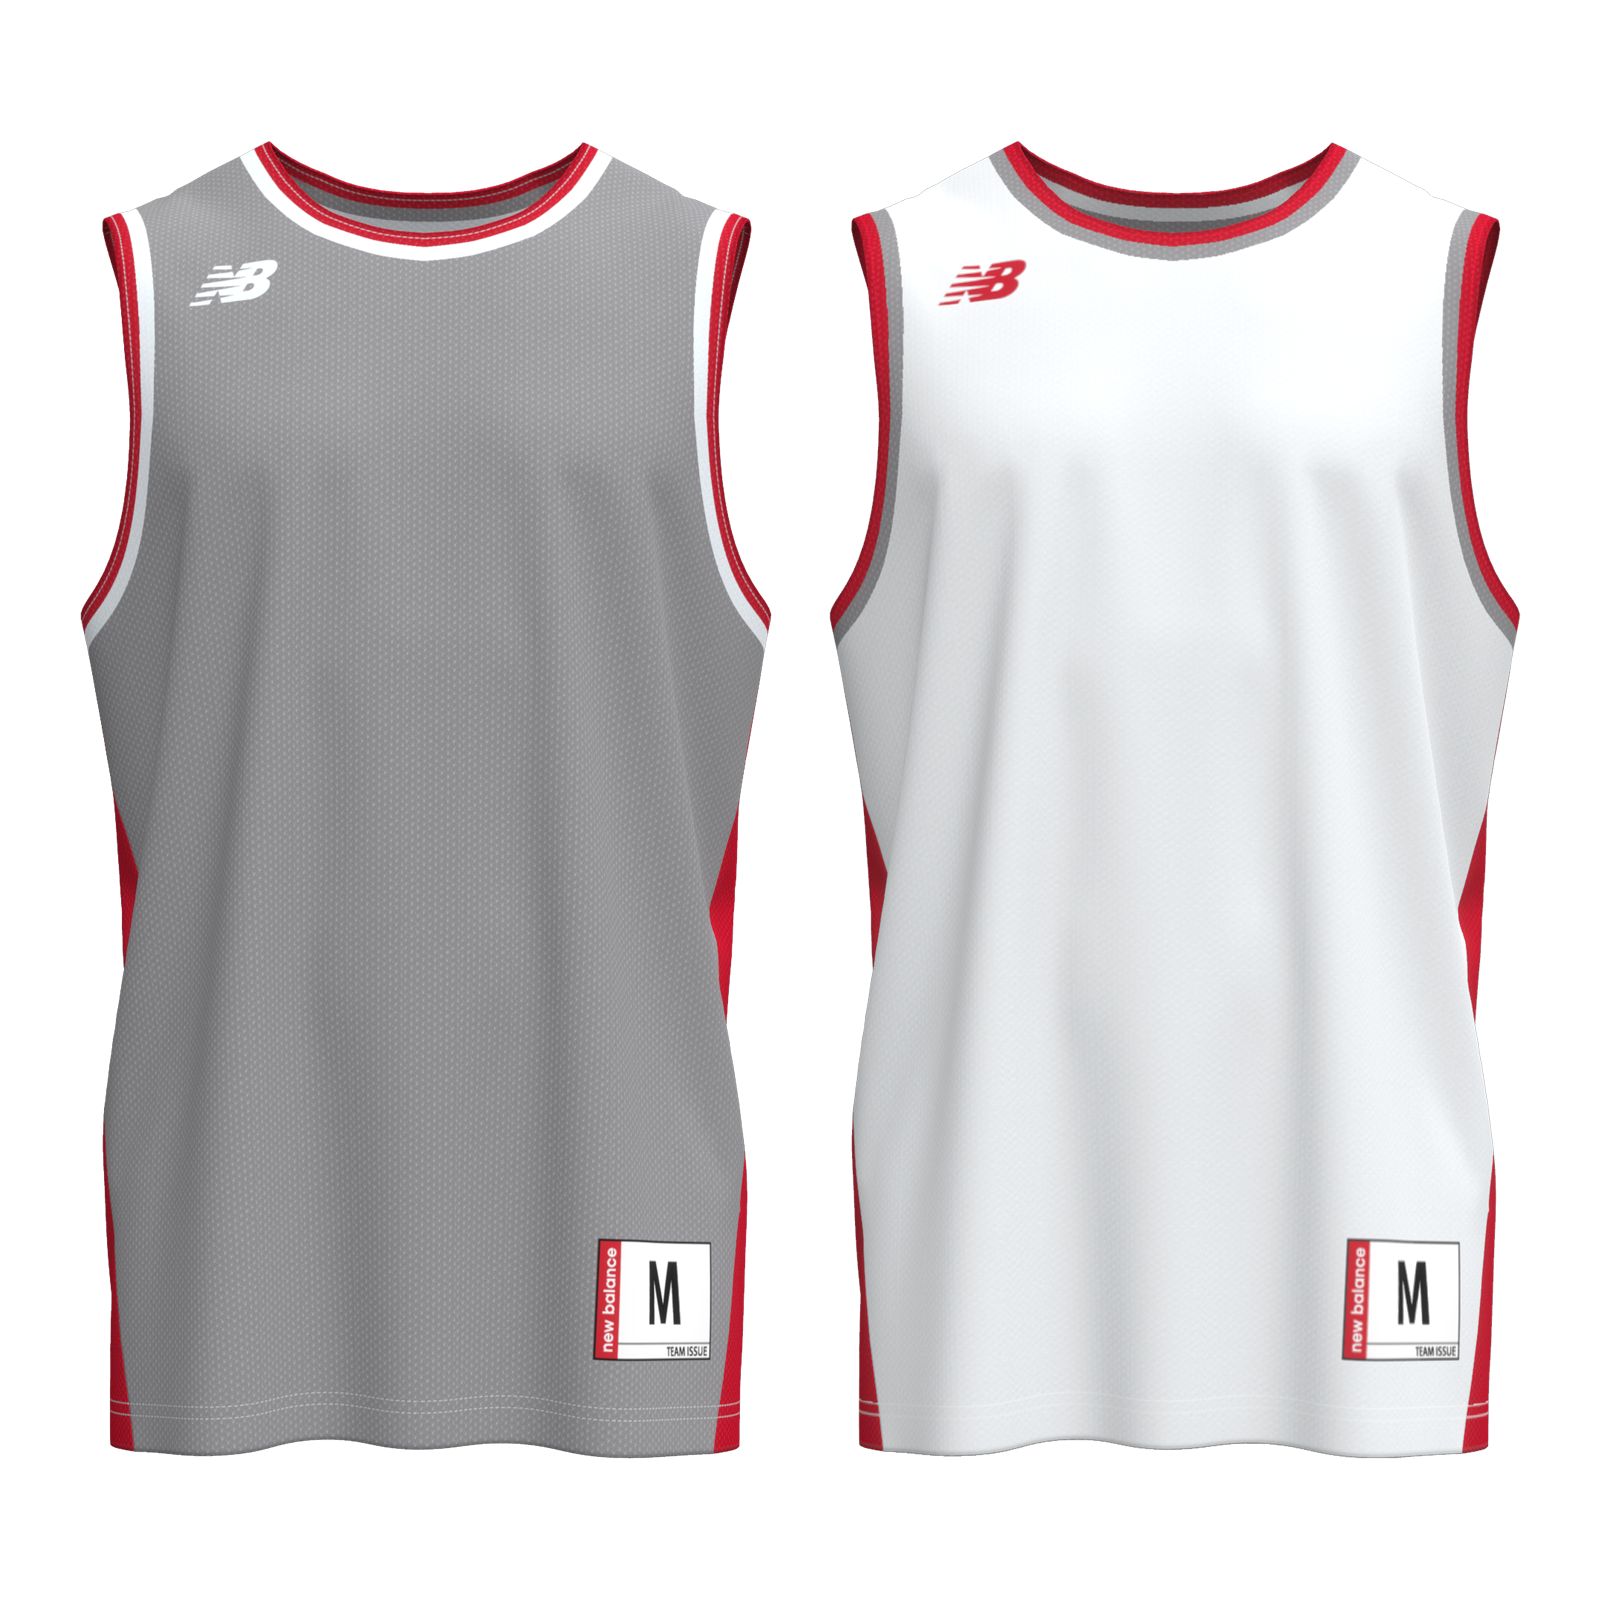 12 Jerseys ideas  jersey outfit, mens outfits, basketball jersey